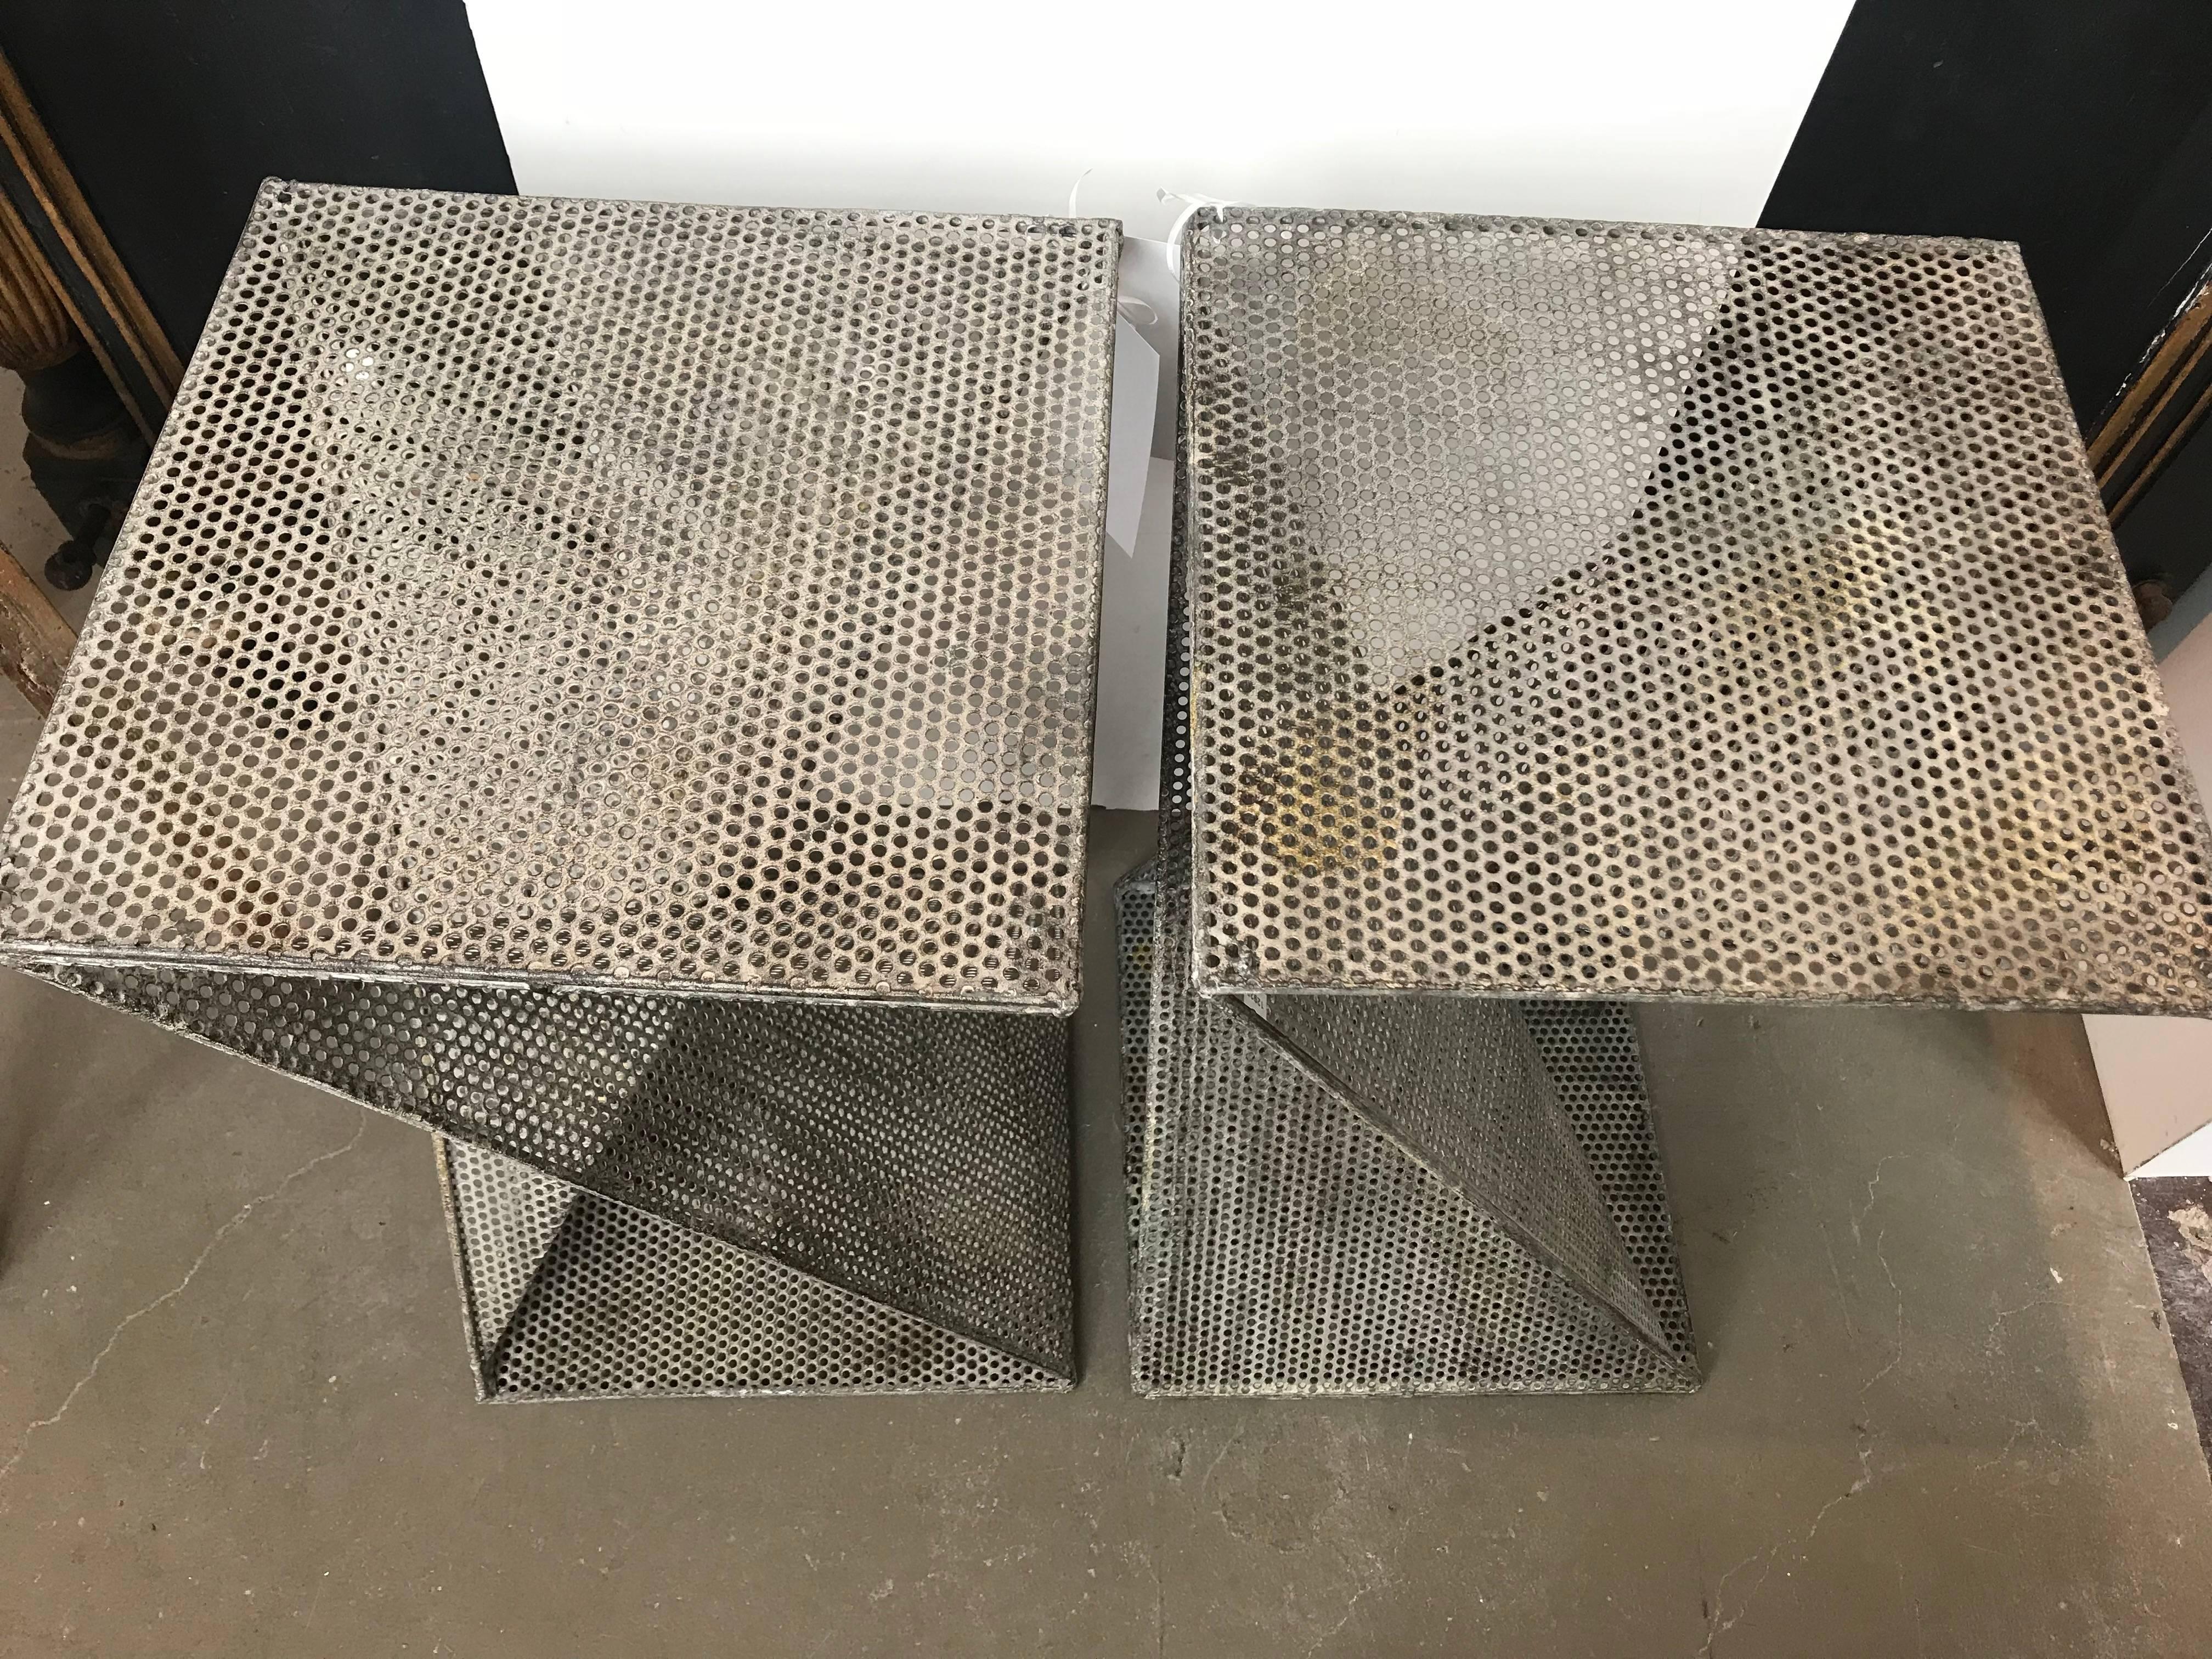 Uniquely shaped tables of perforated metal. Priced and sold separately, two available.